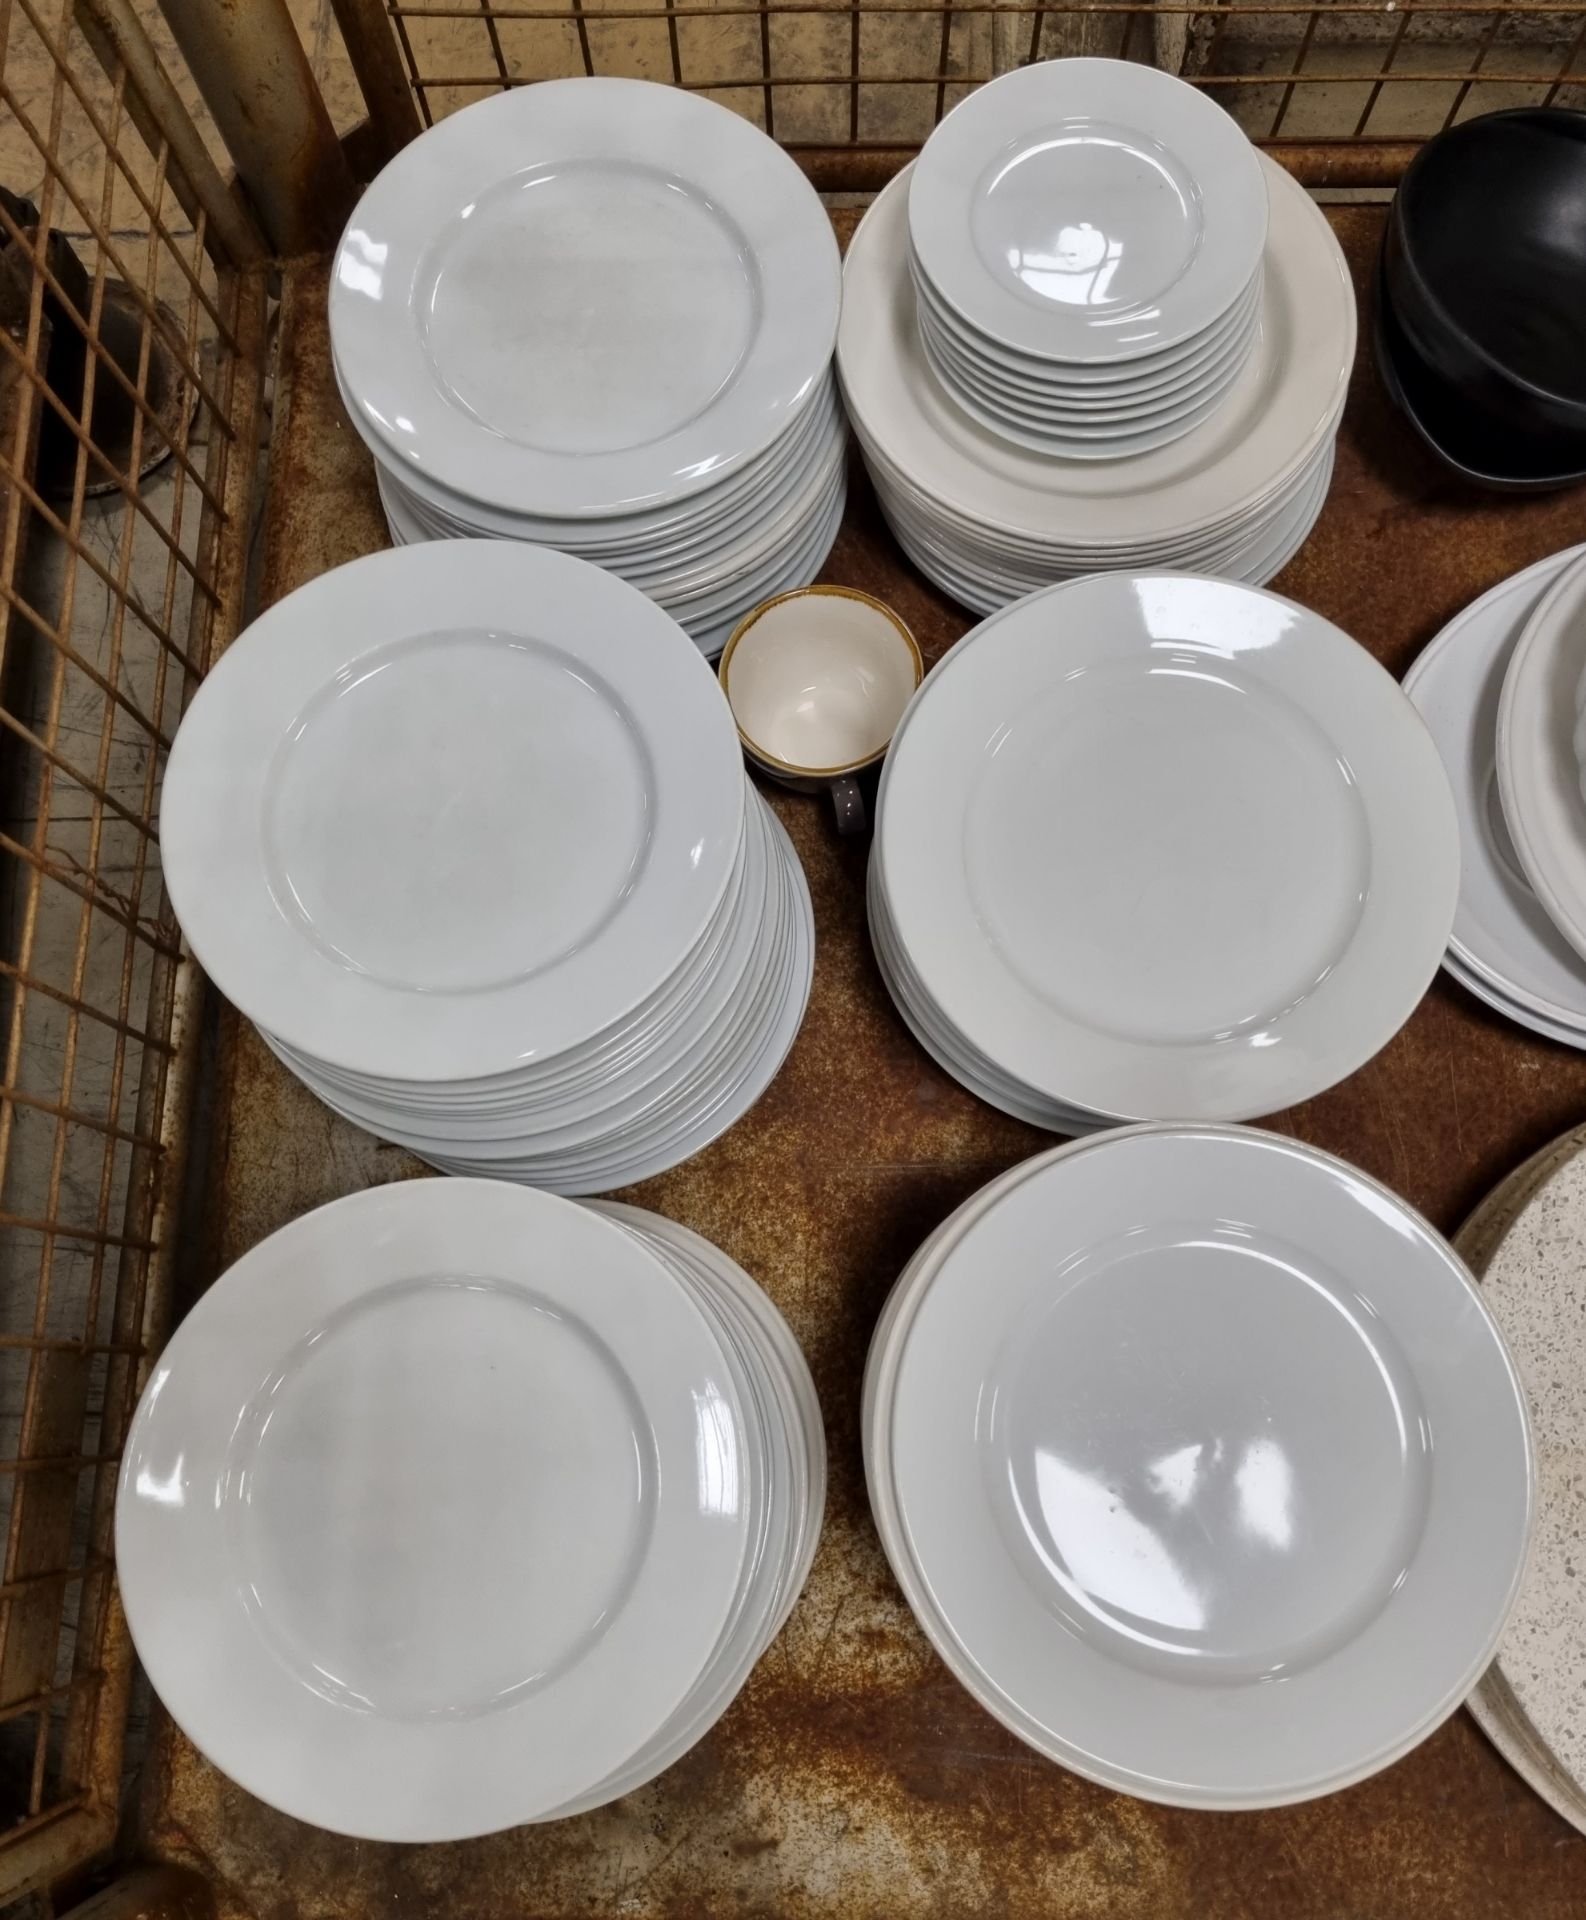 Catering equipment and supplies consisting of crockery,jugs,plates,cake stands, flan dishes - Image 3 of 6